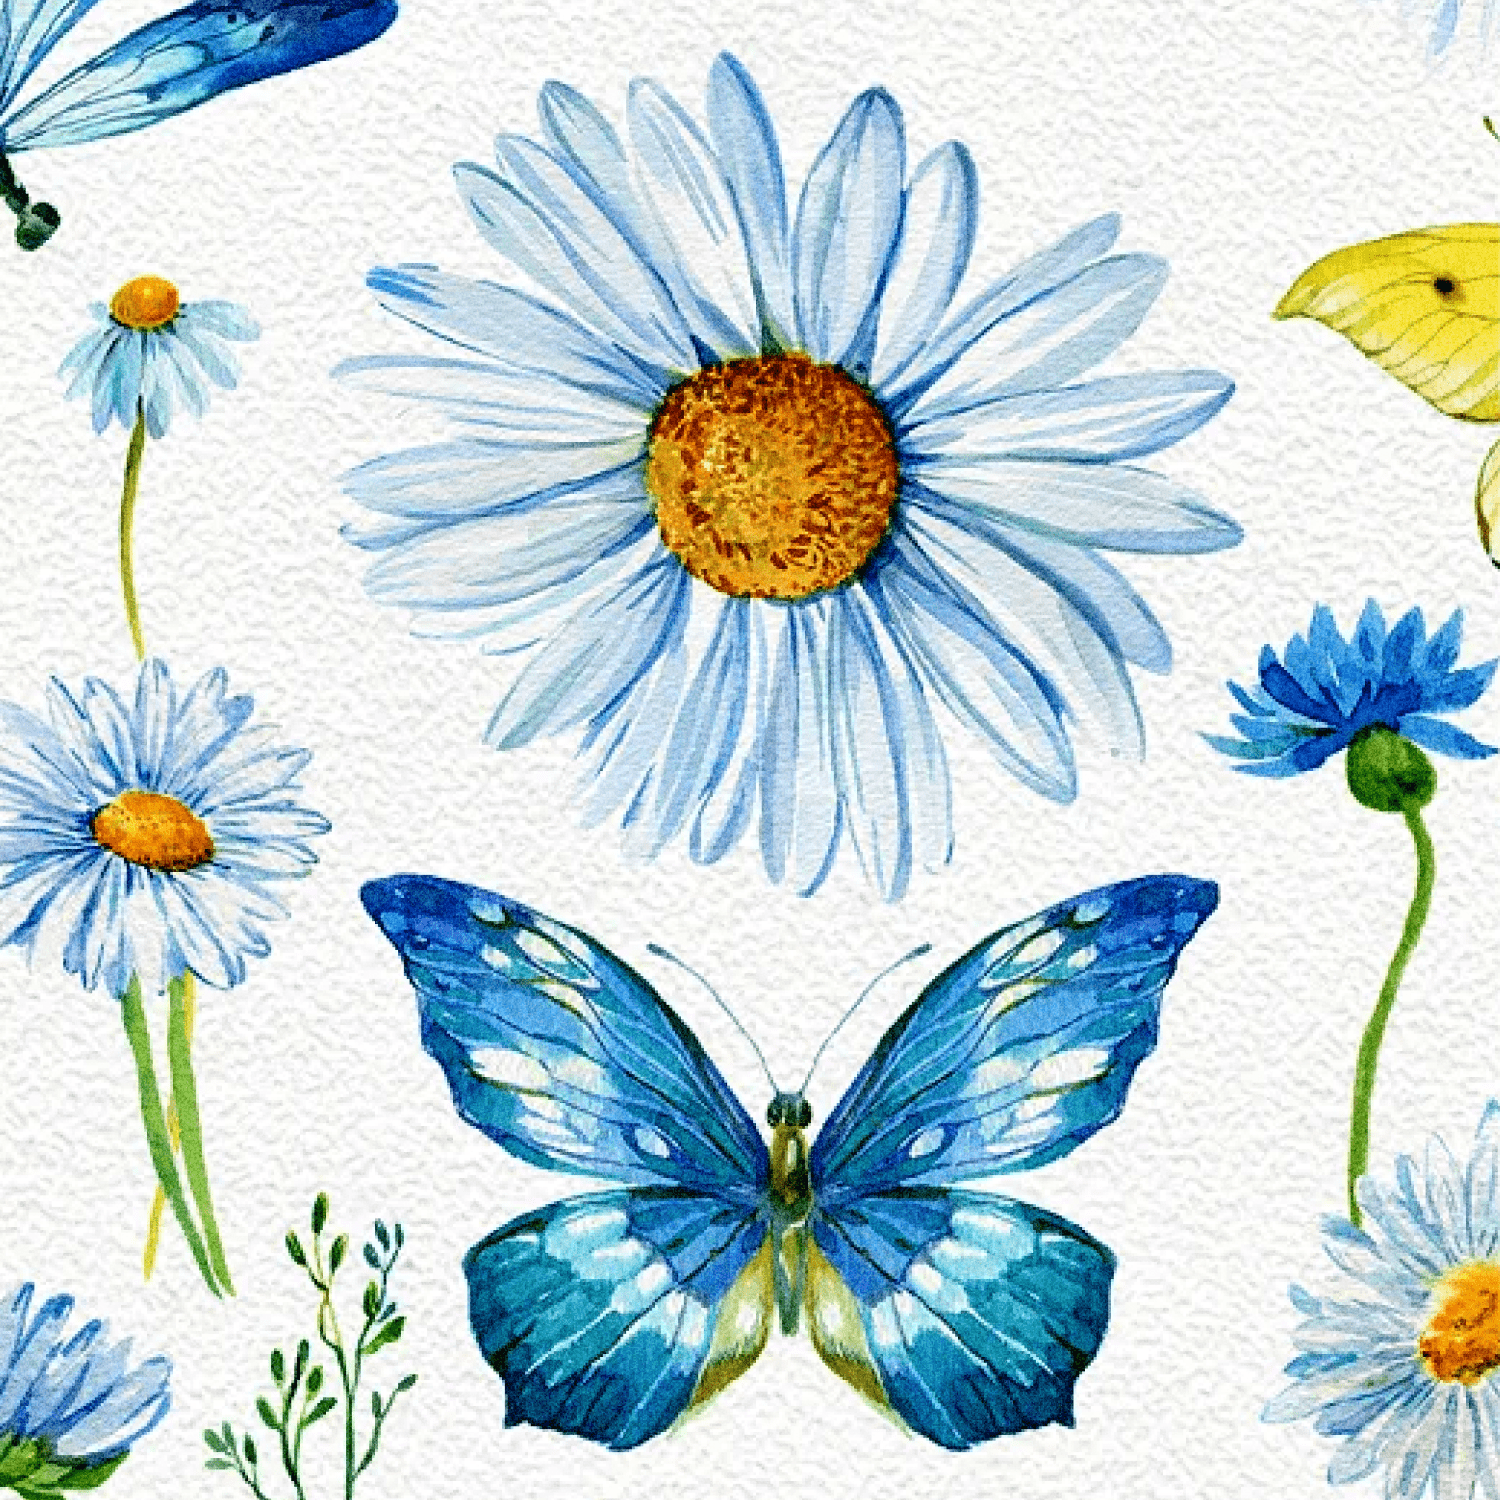 Daisy Clipart Watercolor created by MitrushovaArt.